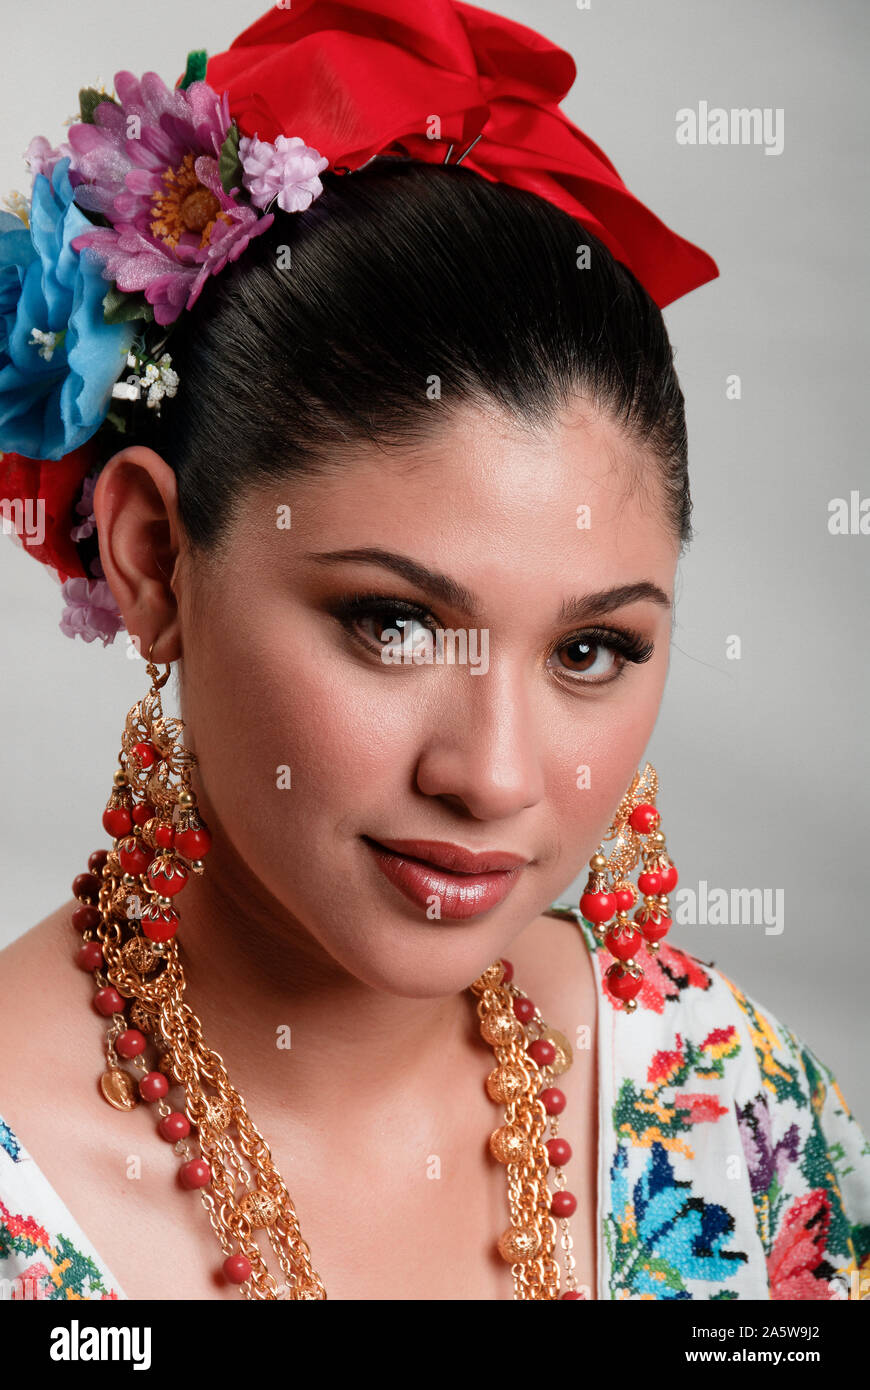 Portrait of a younf mexican girl in full mayan huipil traditional attire. Stock Photo